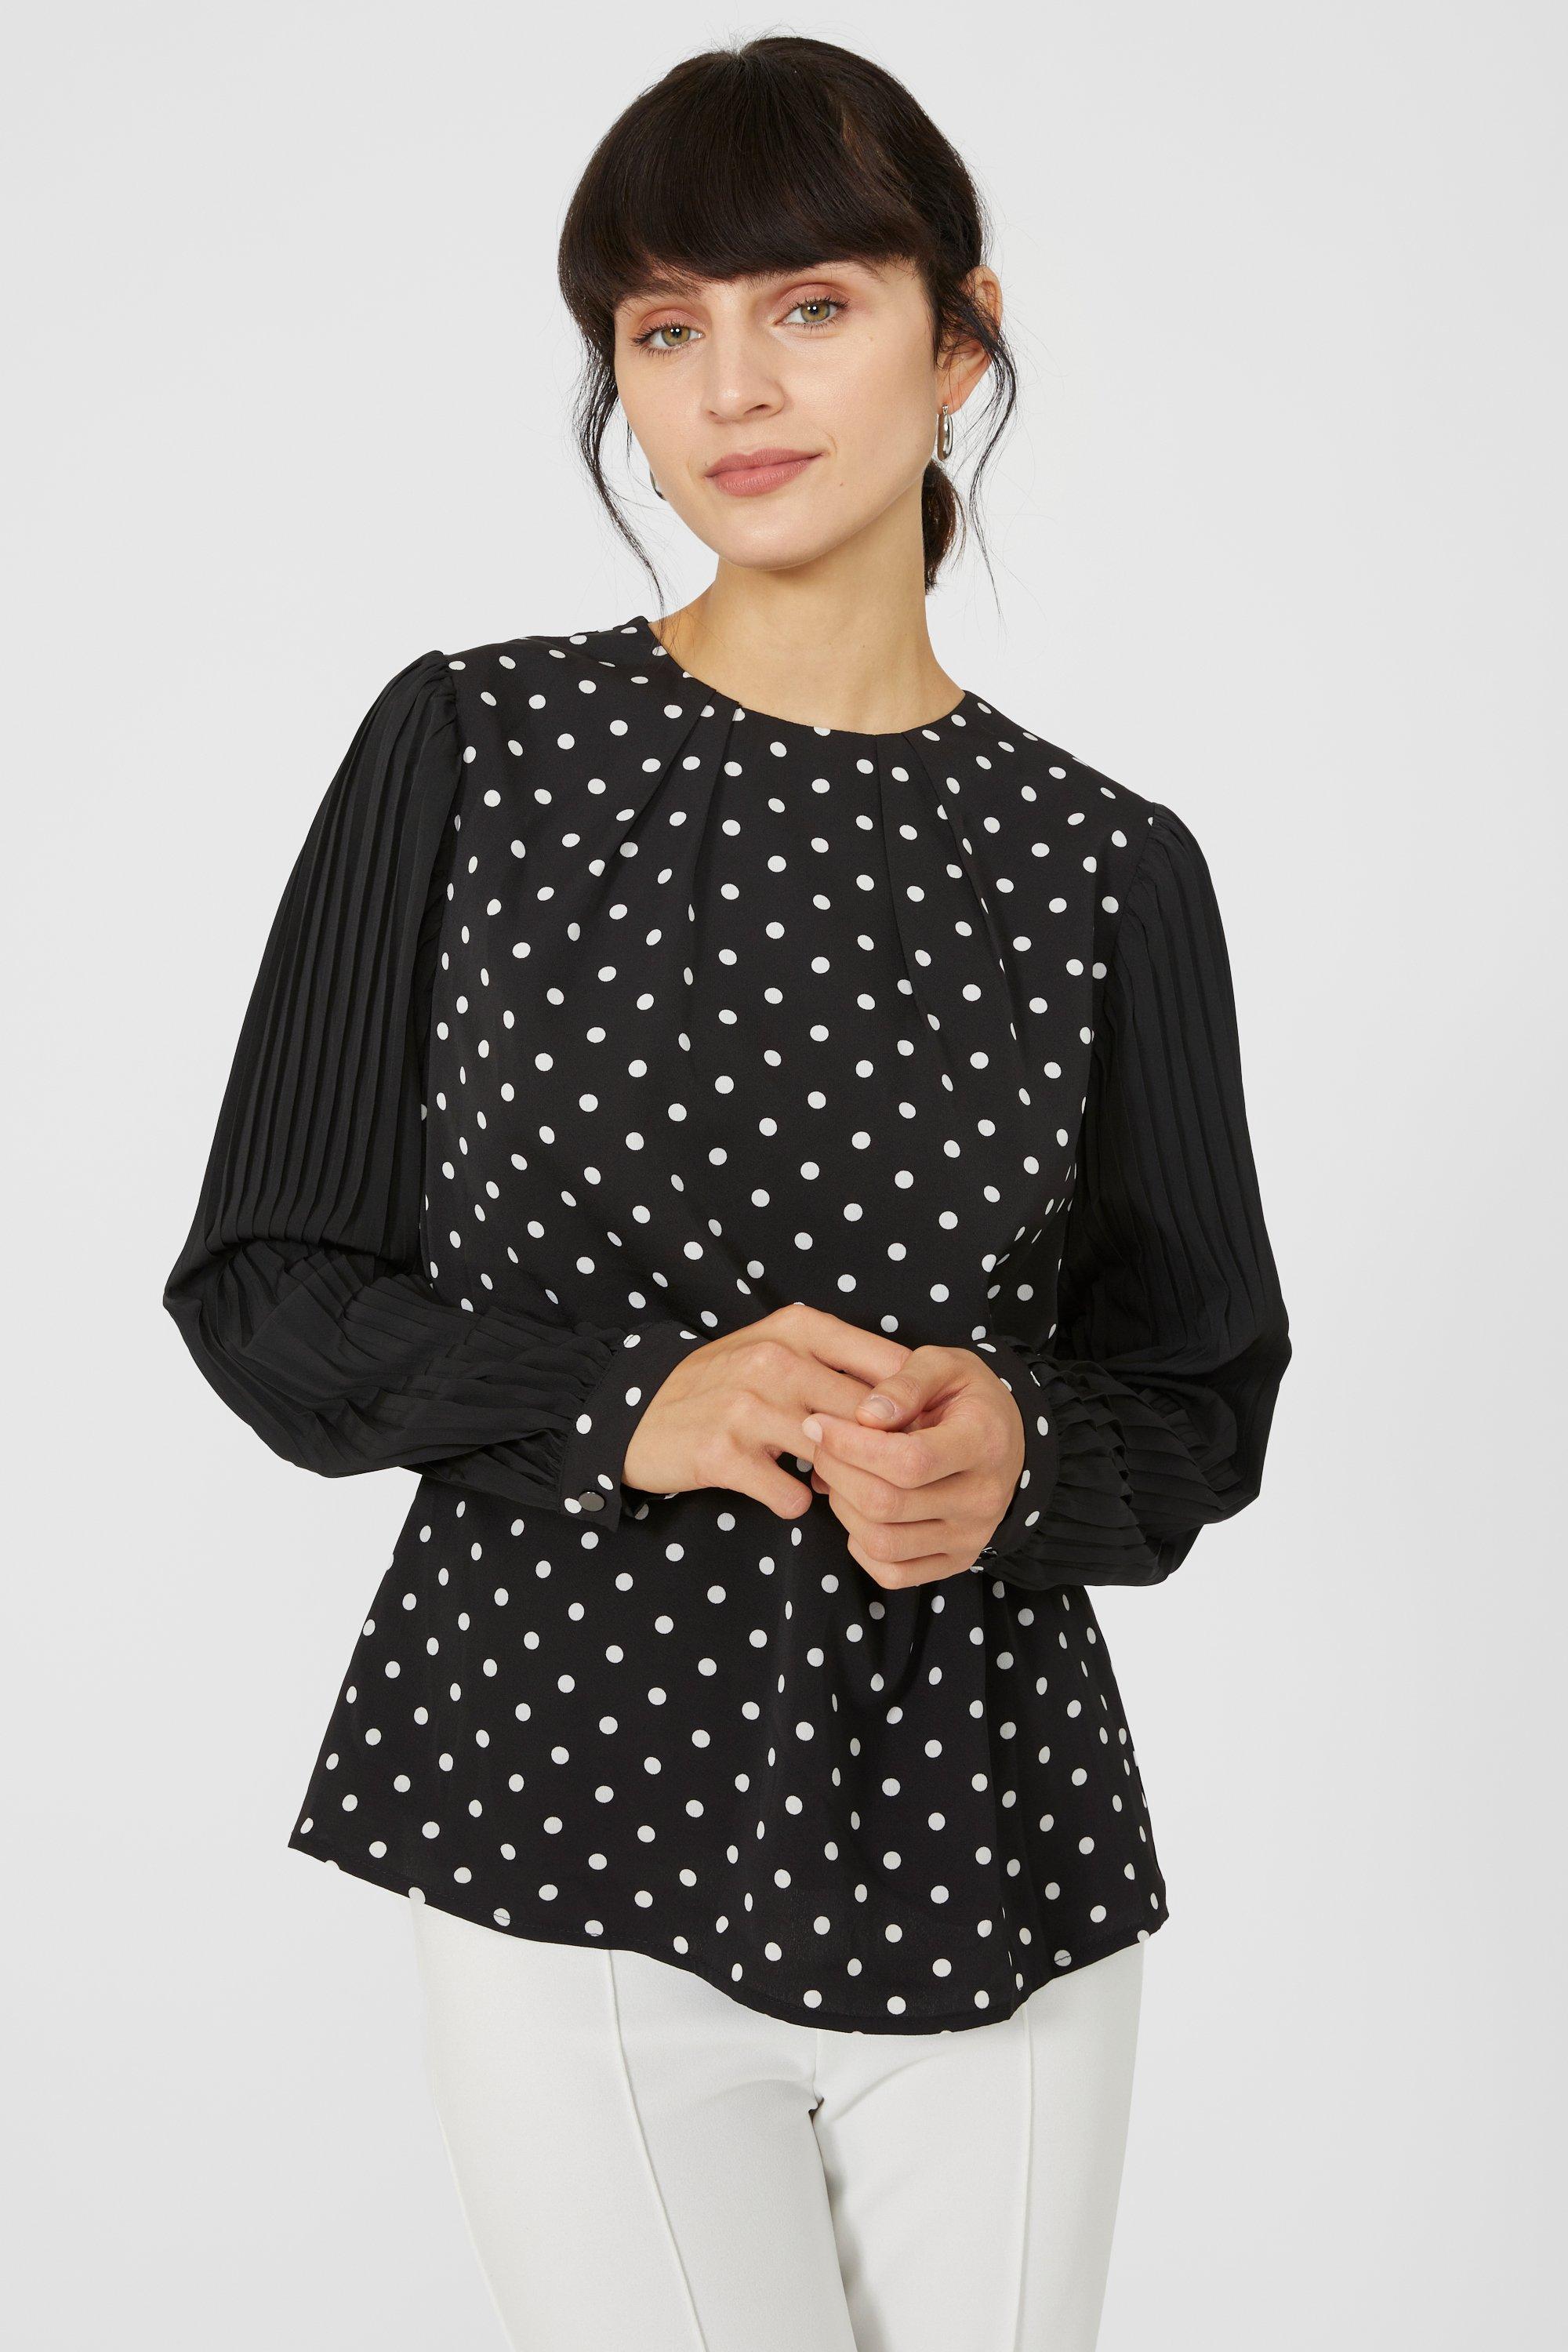 Tops | Pleated Printed Sleeve Chiffon Blouse | Principles